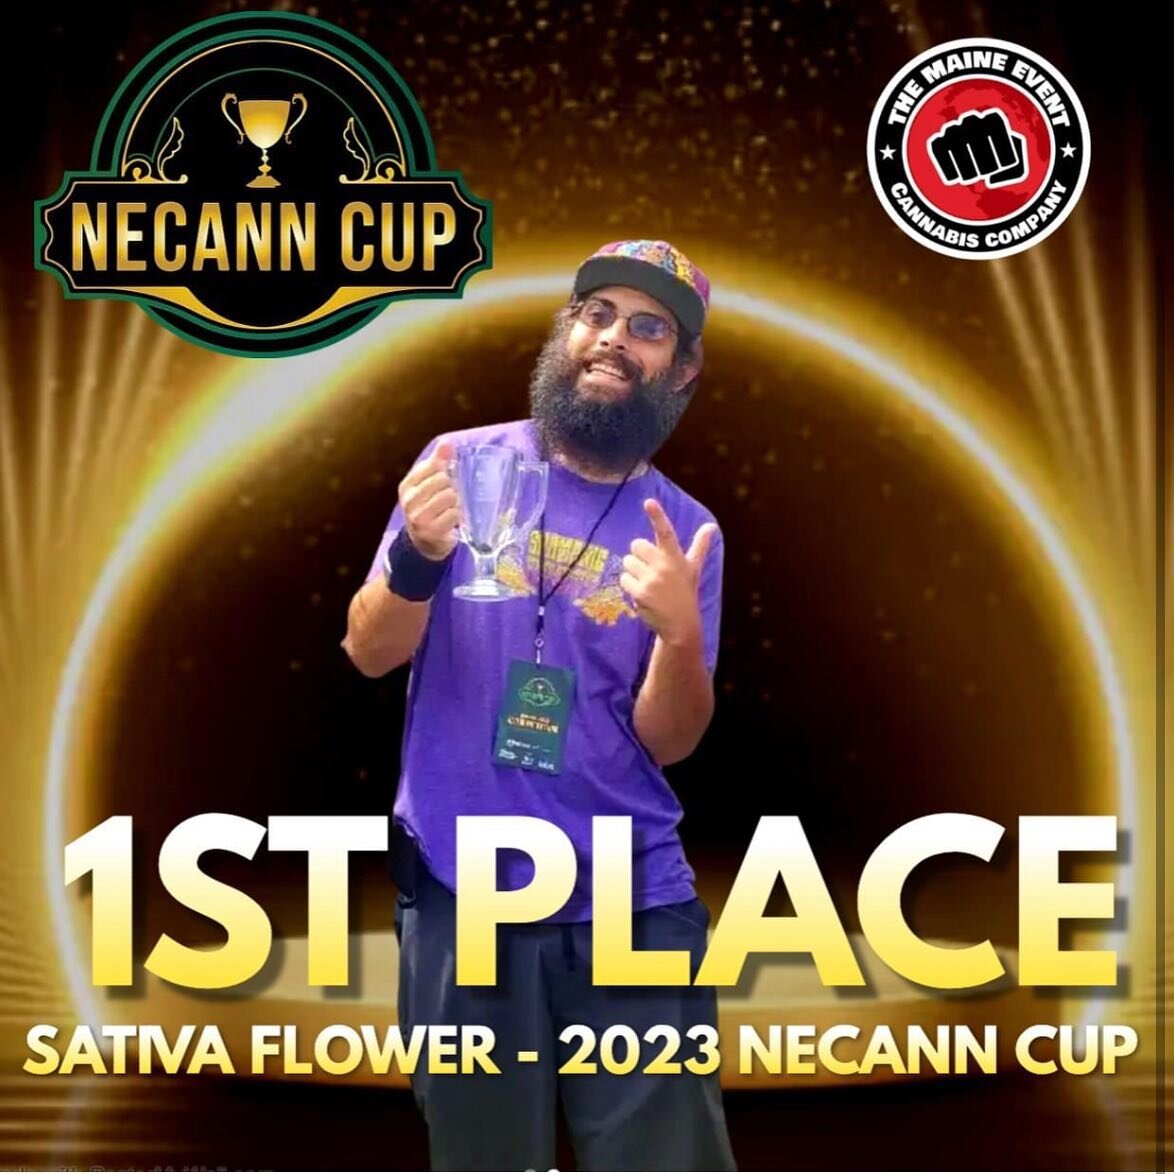 Congratulations to @rootsshamanic, our trusted grower and a valued member of our maine event family on their 2023 NECANN CUP winning sativa strain - Peach Milano!